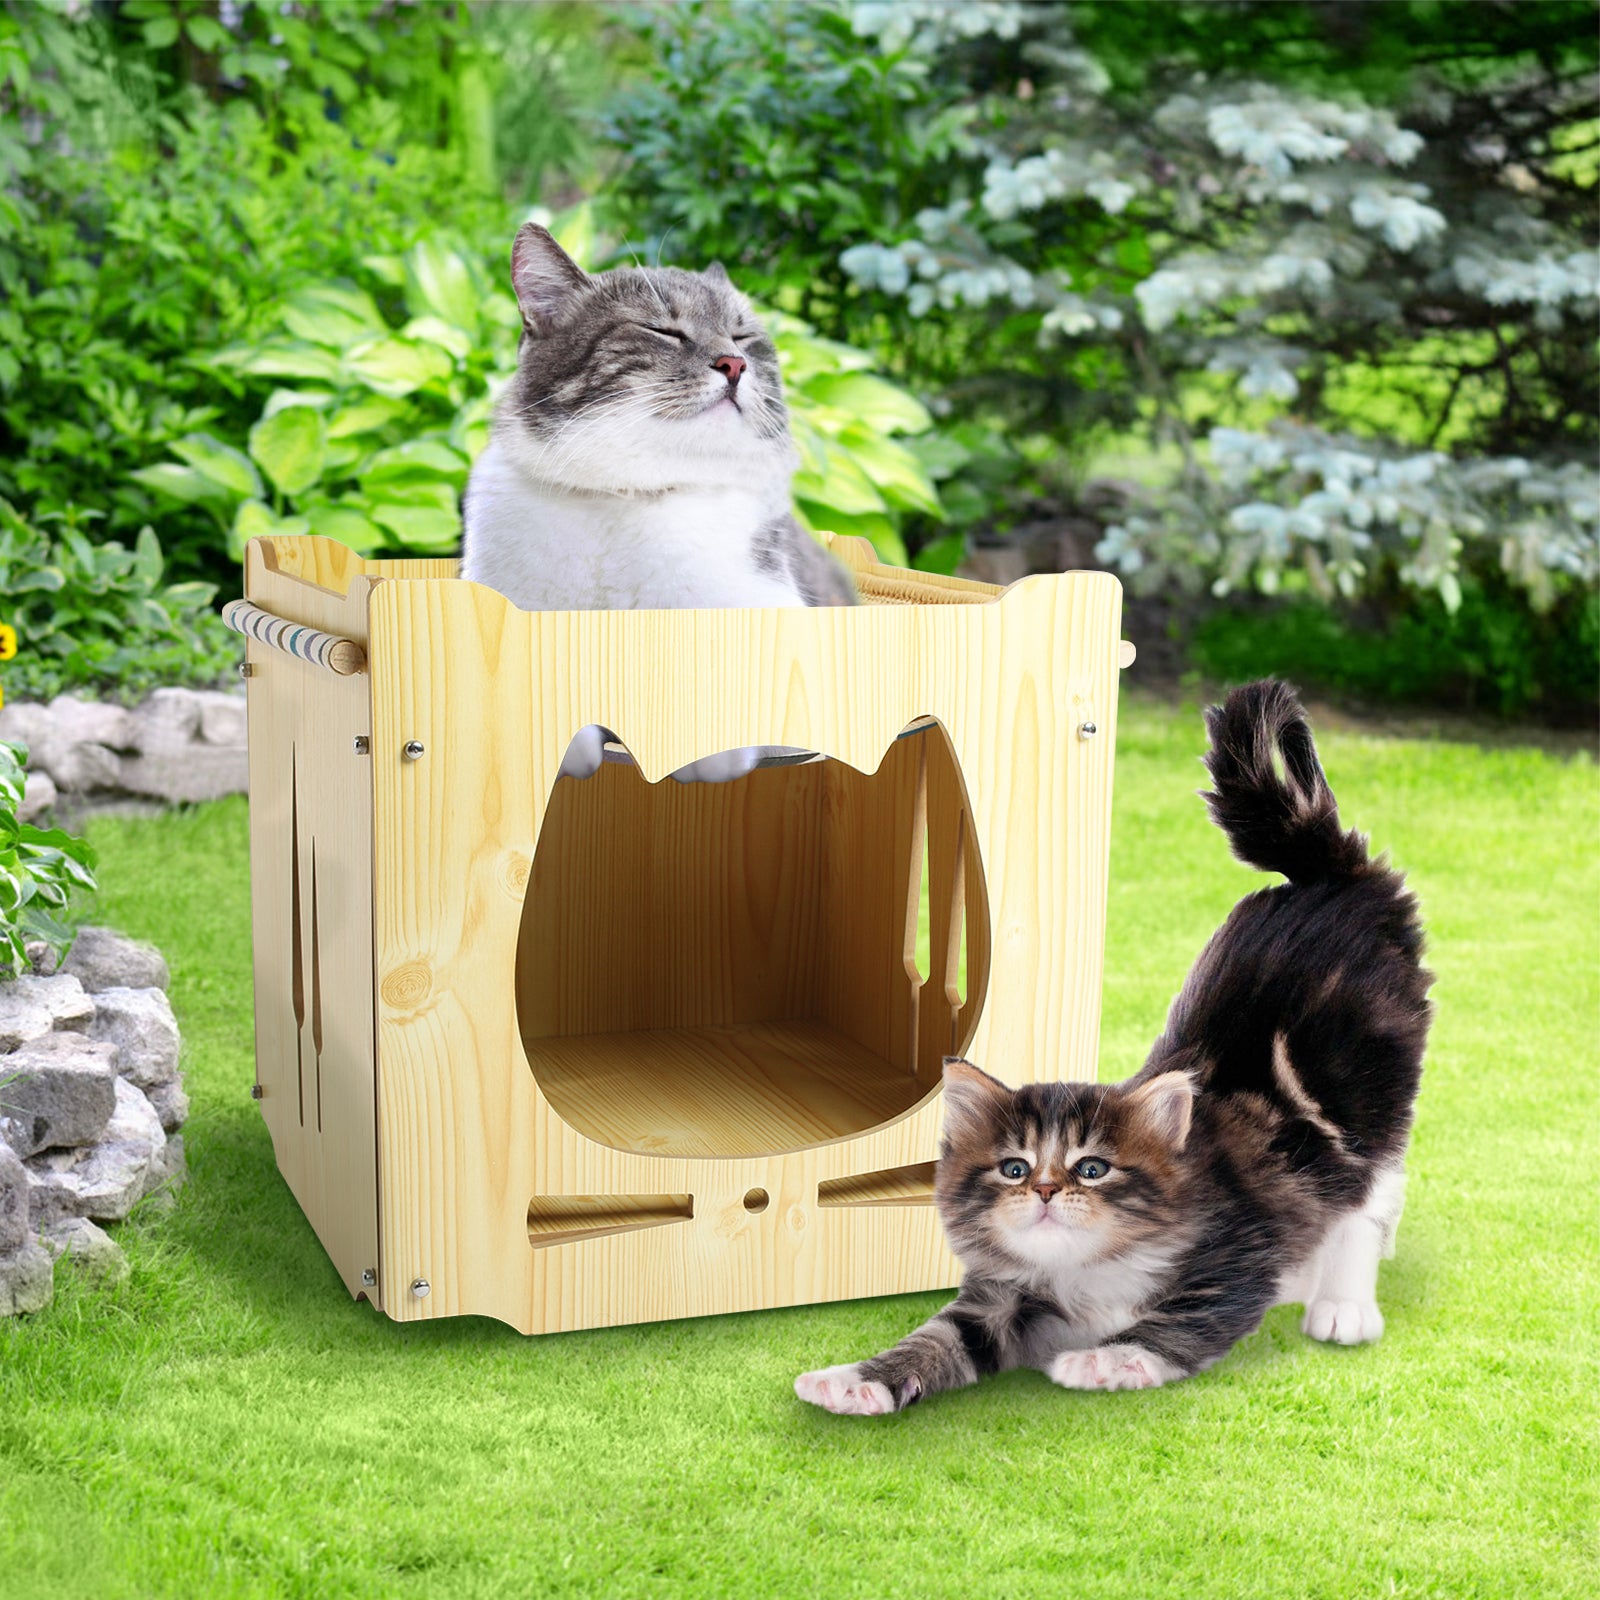 Todeco-Wooden-Cat-House-Double-Layer-Wooden-Cat-Kennel-with-Hammock-34x34x34cm-with-Scratching-Board-Cat-Ball-Cushion-for-Indoors-or-Outdoors-Small-Dogs-and-Cats